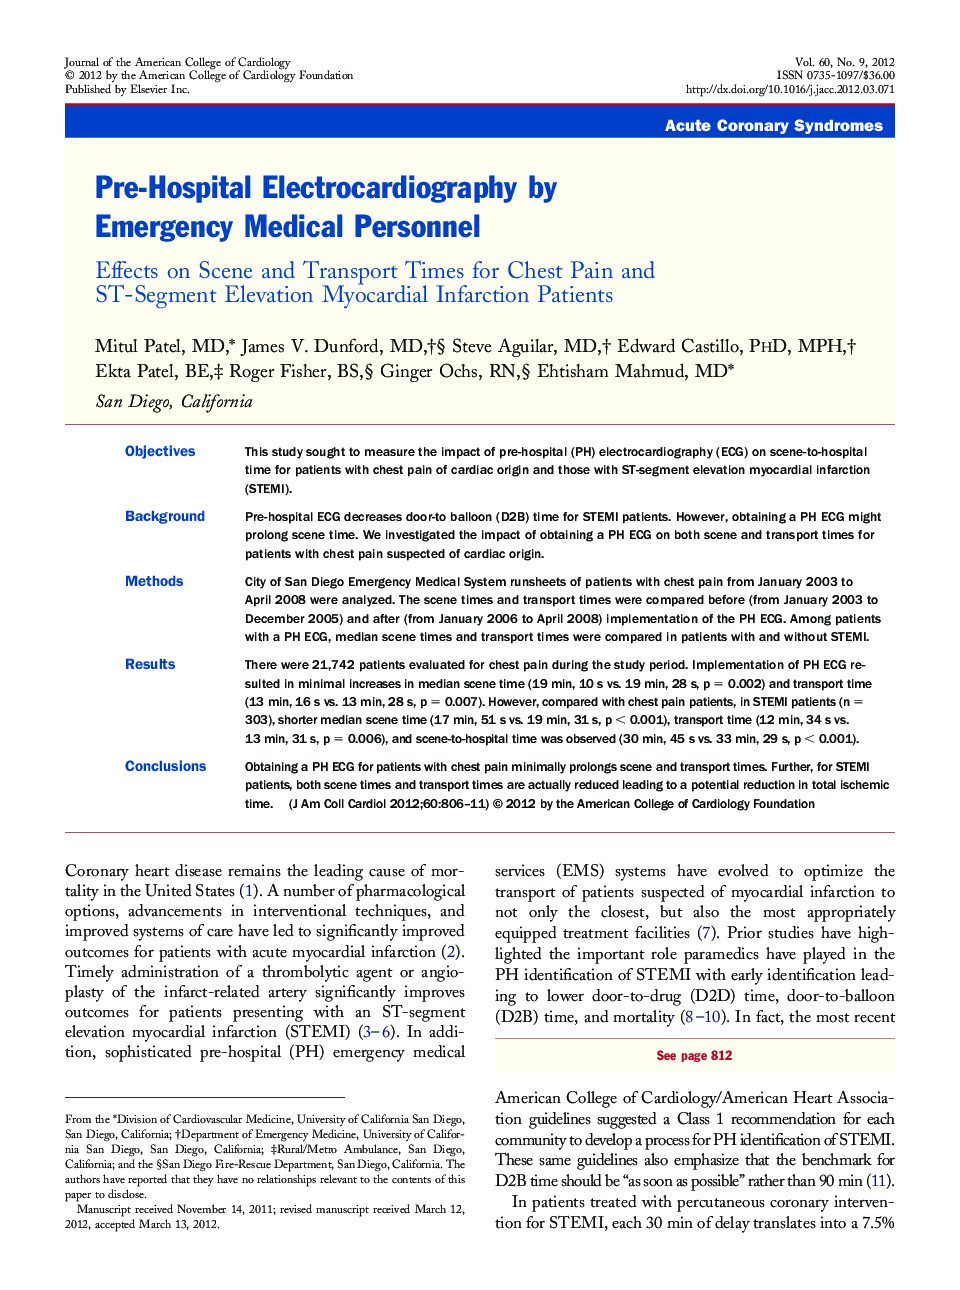 Pre-Hospital Electrocardiography by Emergency Medical Personnel : Effects on Scene and Transport Times for Chest Pain and ST-Segment Elevation Myocardial Infarction Patients